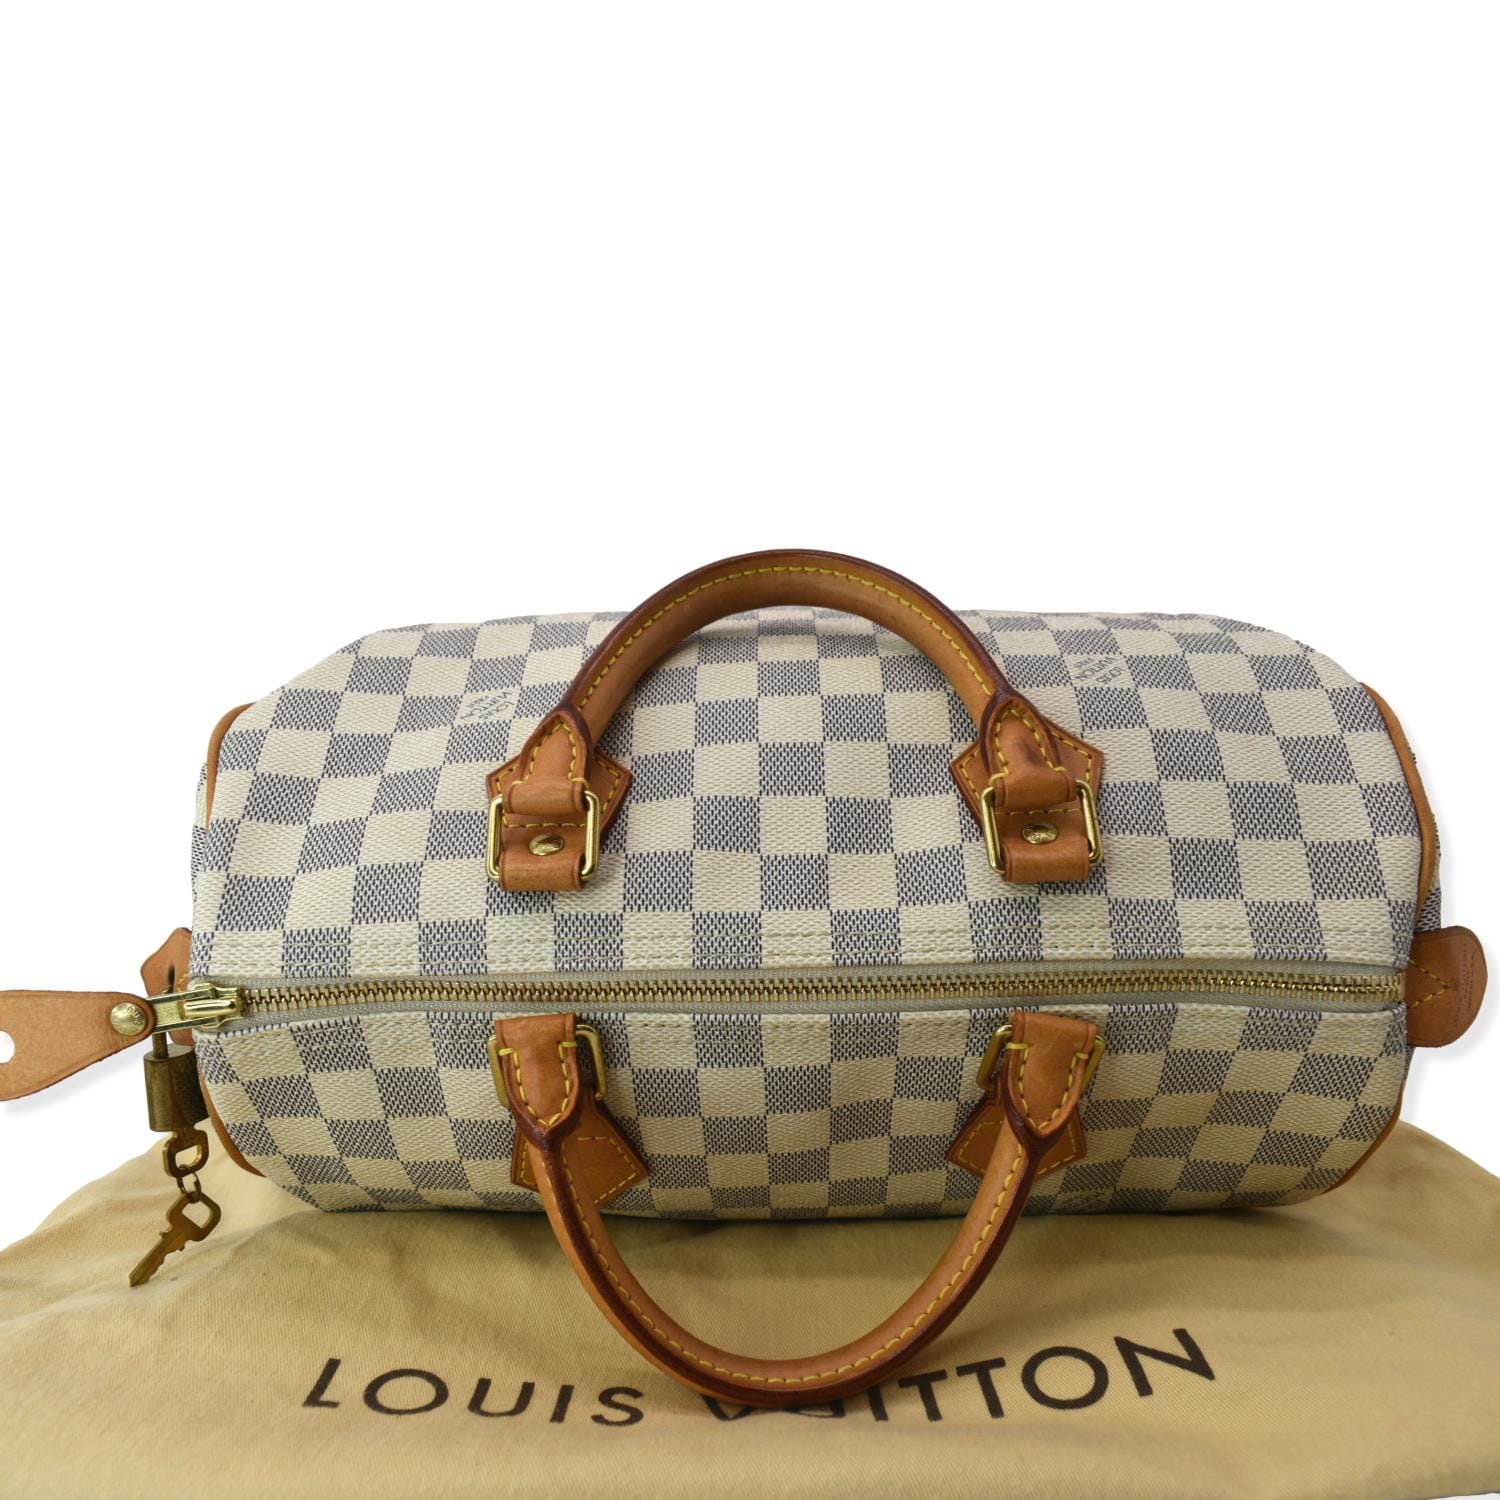 Louis Vuitton Speedy Bag Outfits 😍 + Review and Price Comparison